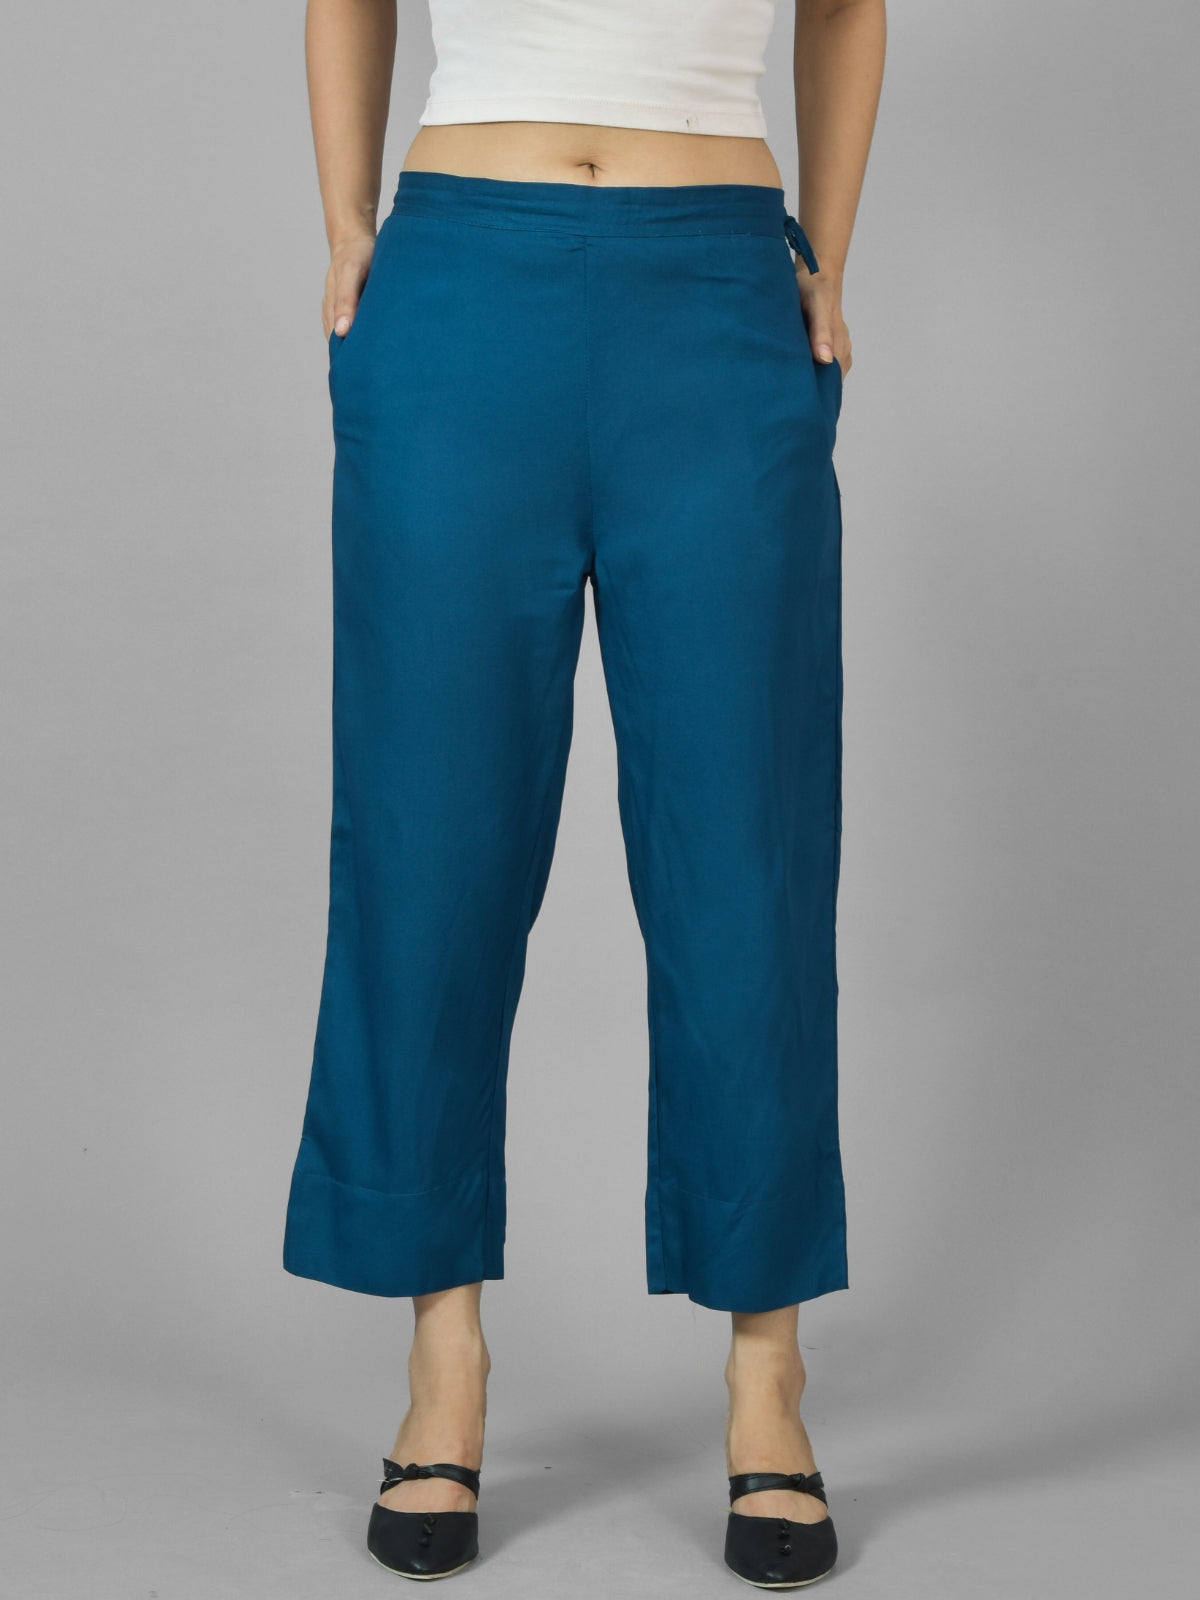 Pack Of 2 Womens Gajri And Teal Blue Ankle Length Rayon Culottes Trouser Combo